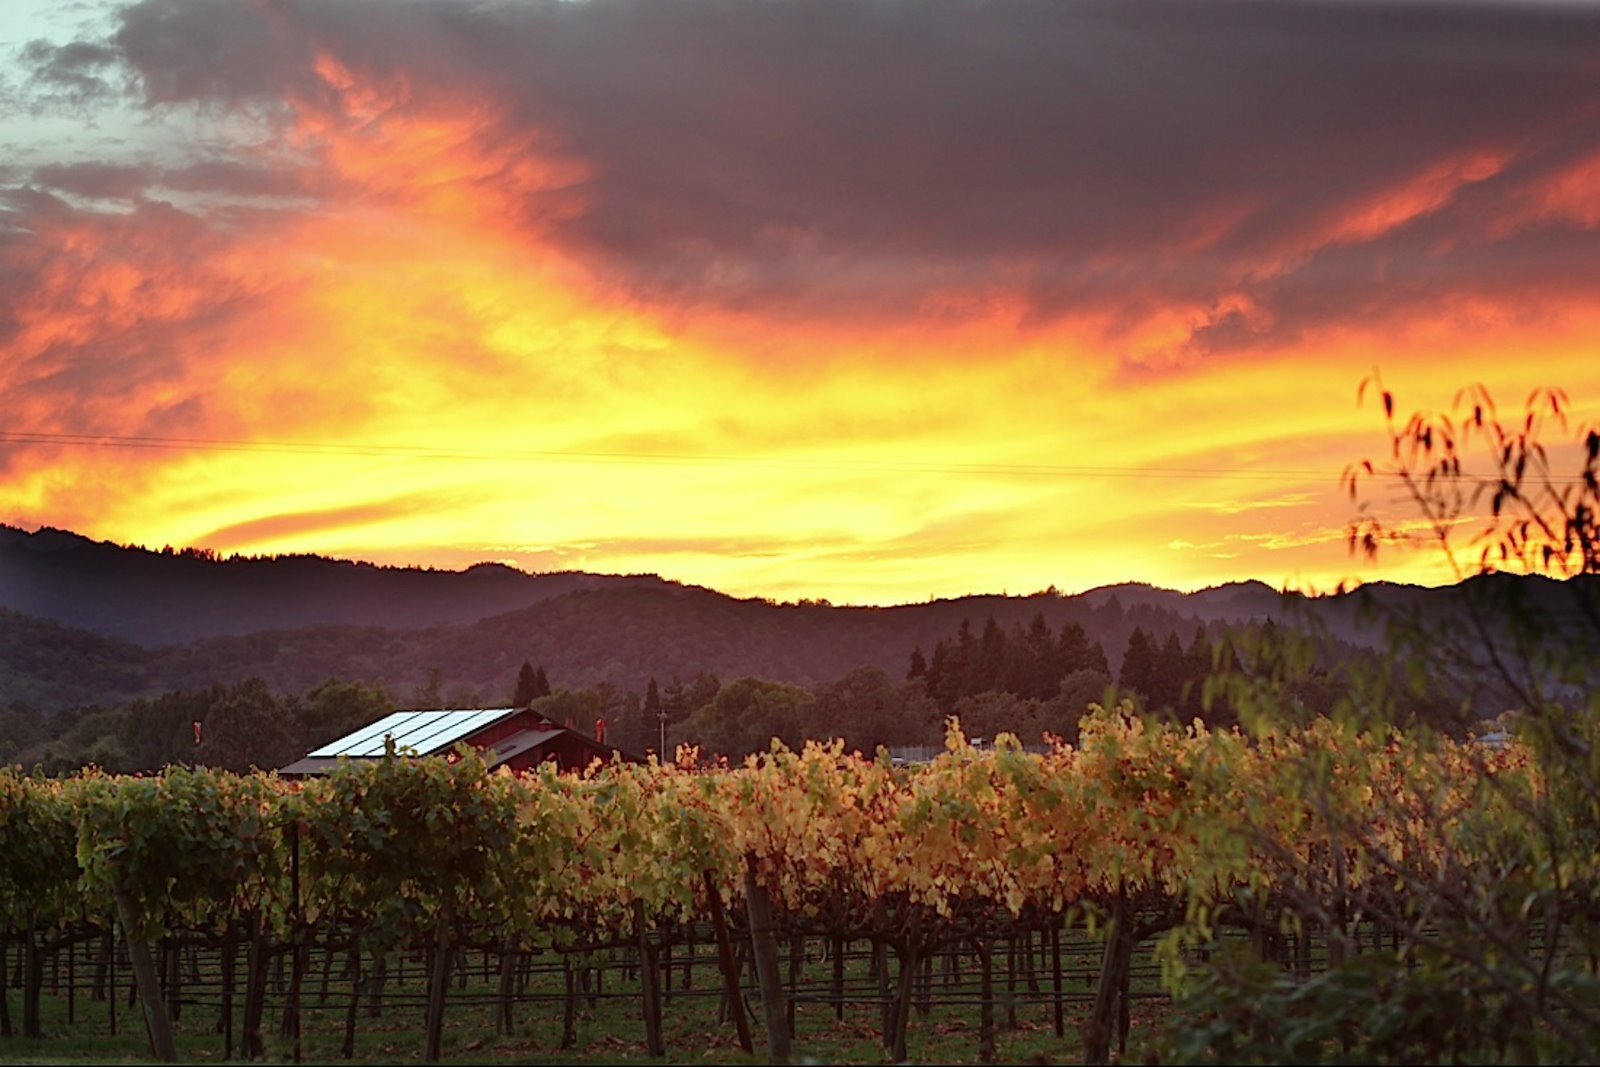 yountville_winery_at_sunset_resize.jpg